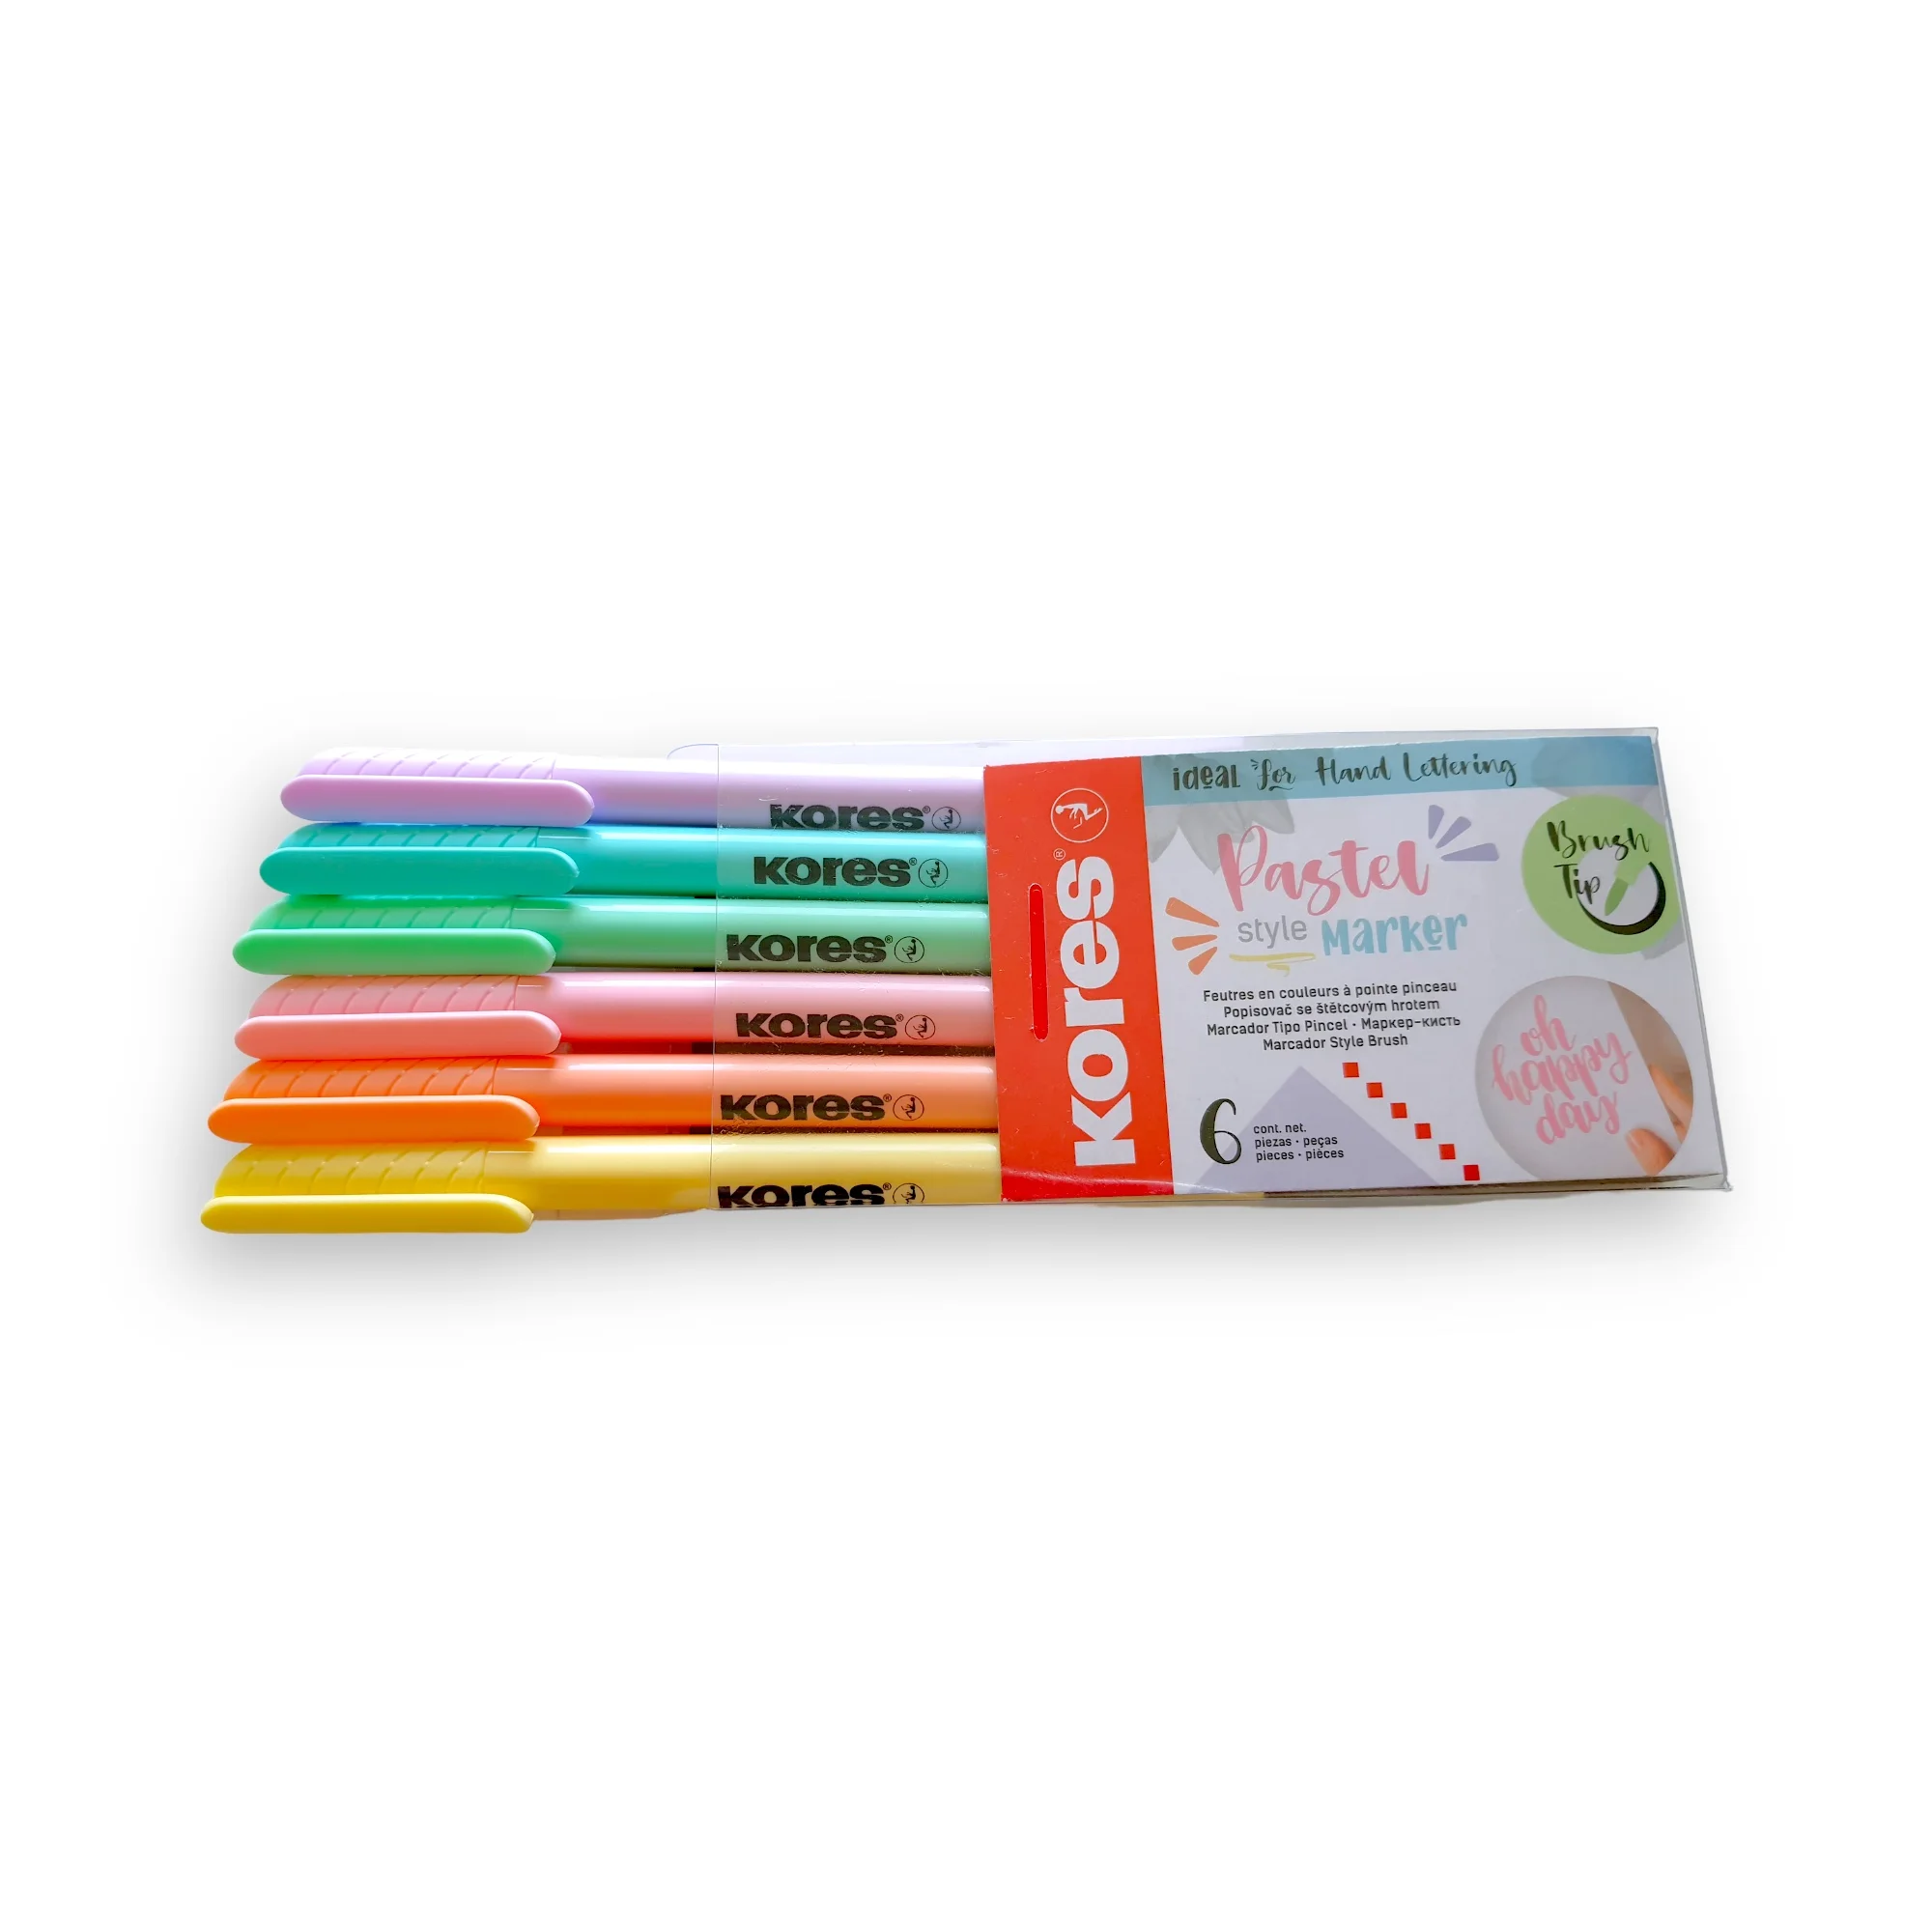 PASTEL STYLE Brush Tip Markers - Kores